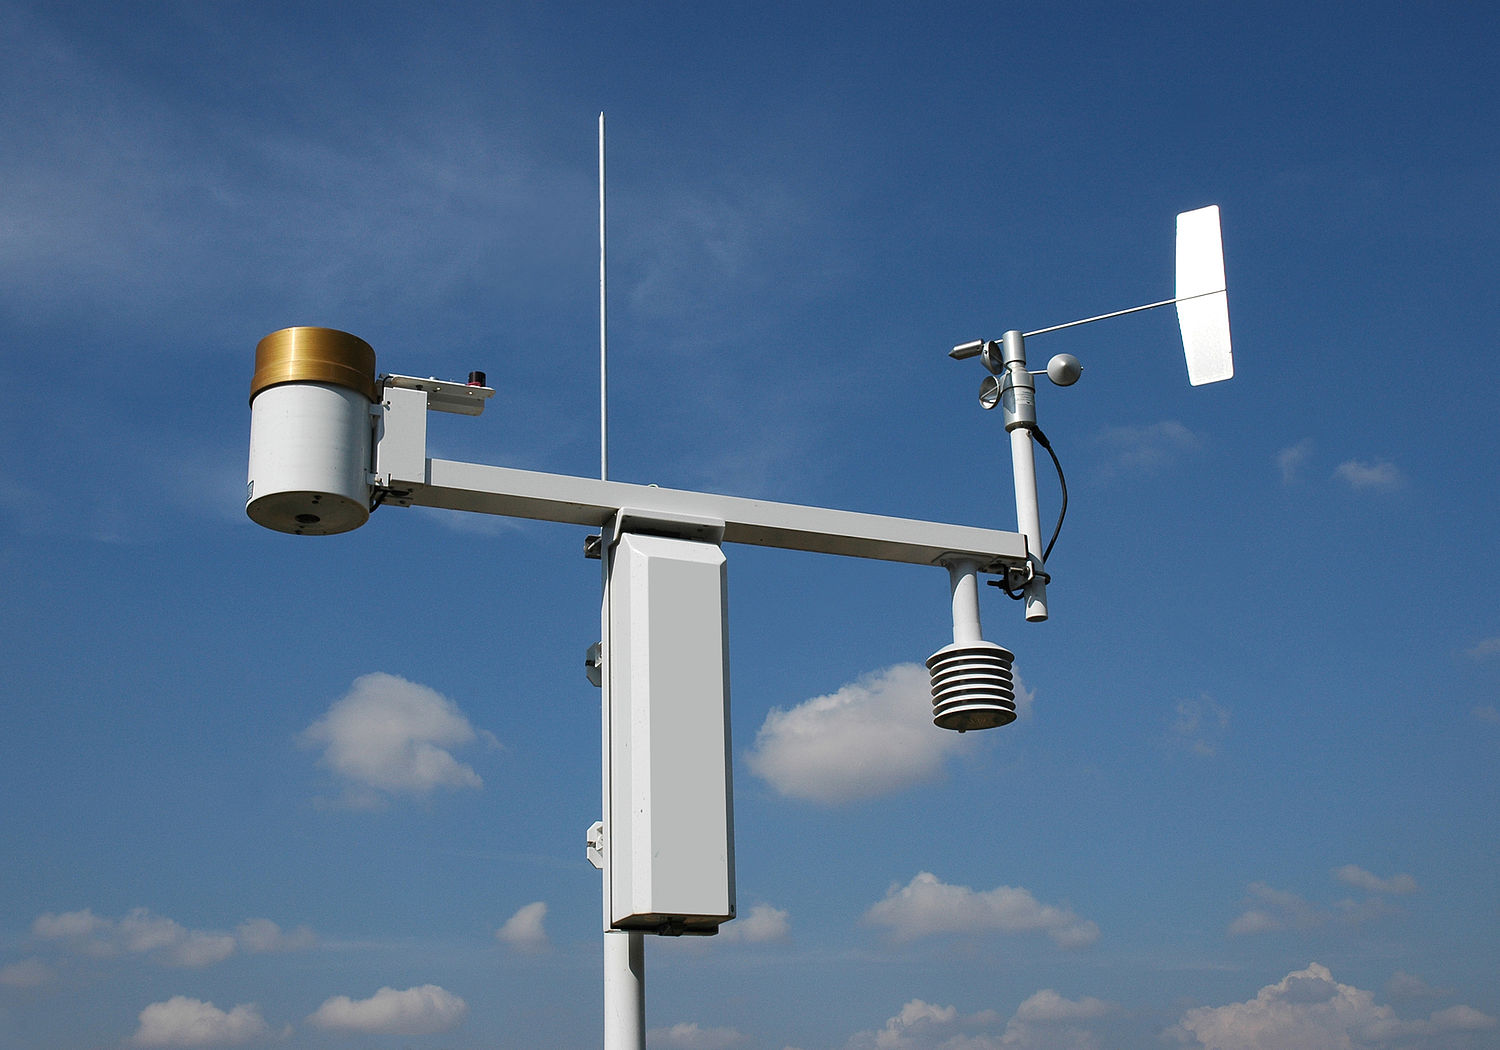 Image of a weather station